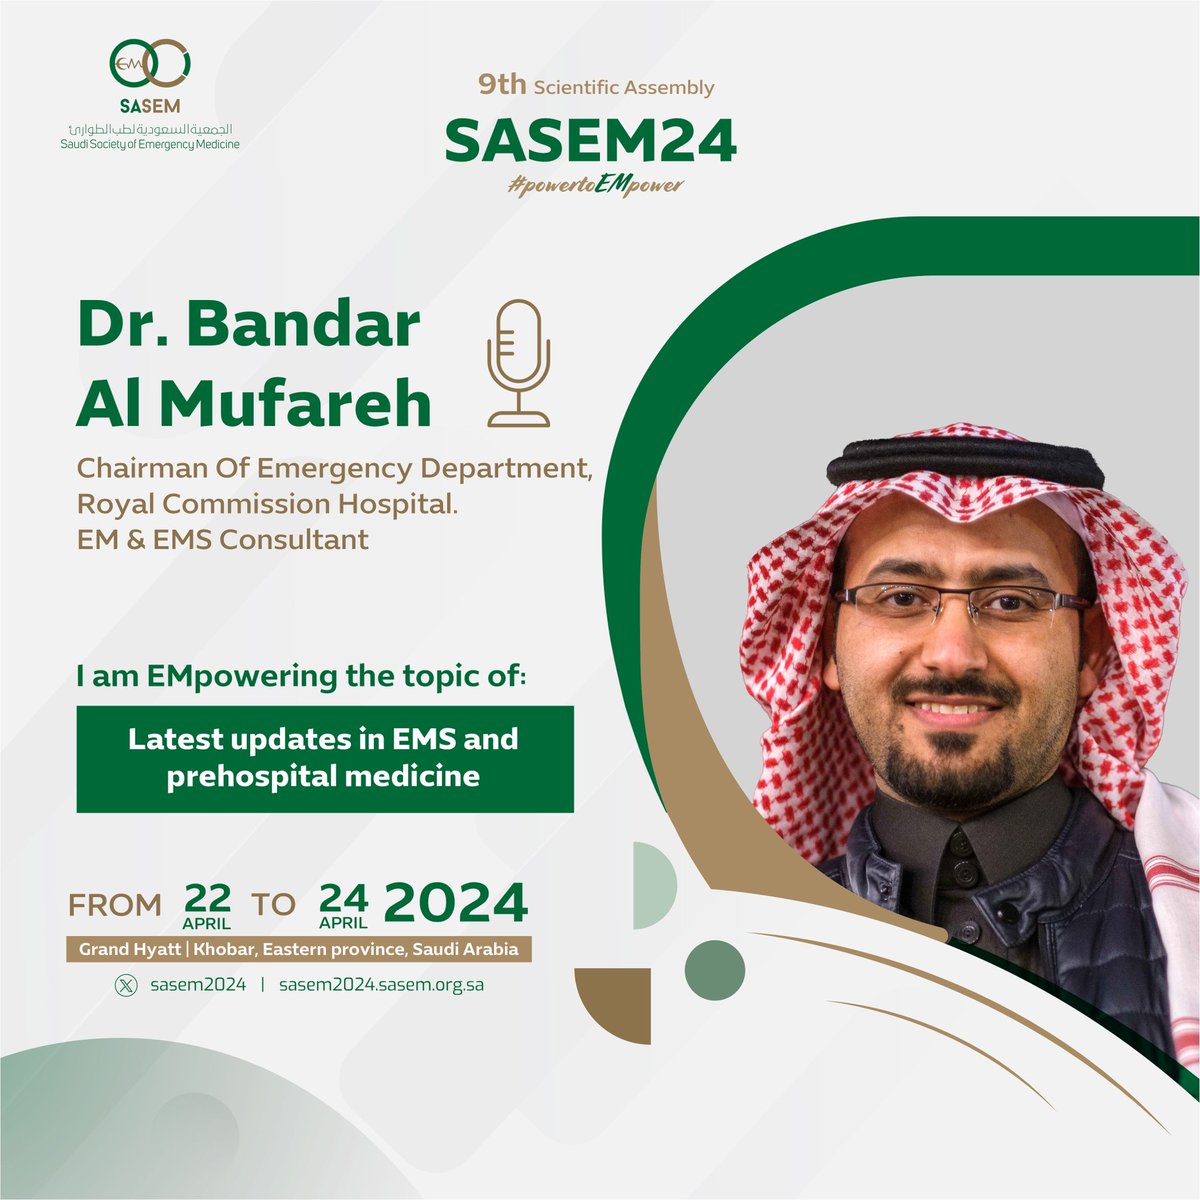 What is new in EMS and prehospital care?!
Join me for the latest updates in resuscitation, trauma care and more.

@sasem2024